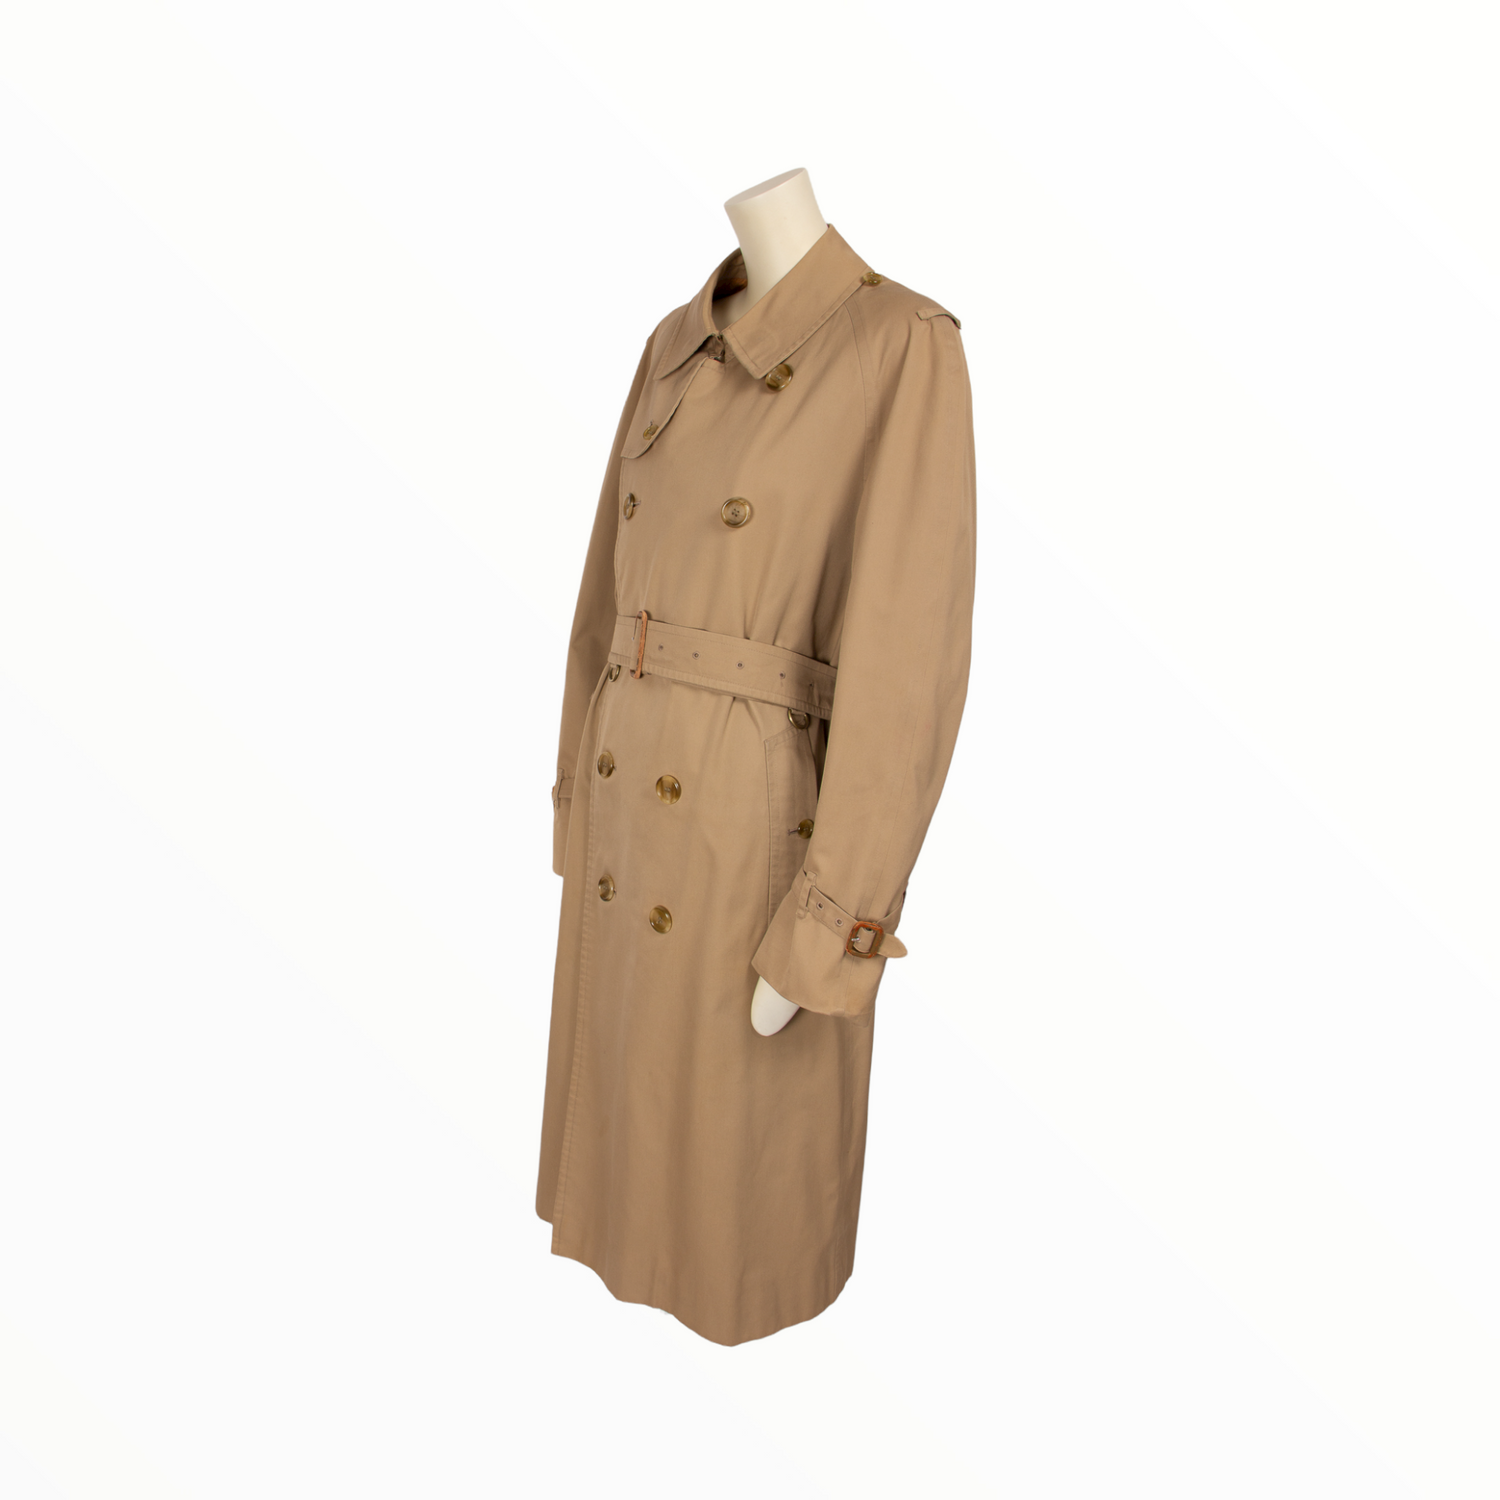 Burberry vintage Trench Coat - M - 1980s secondhand Lysis